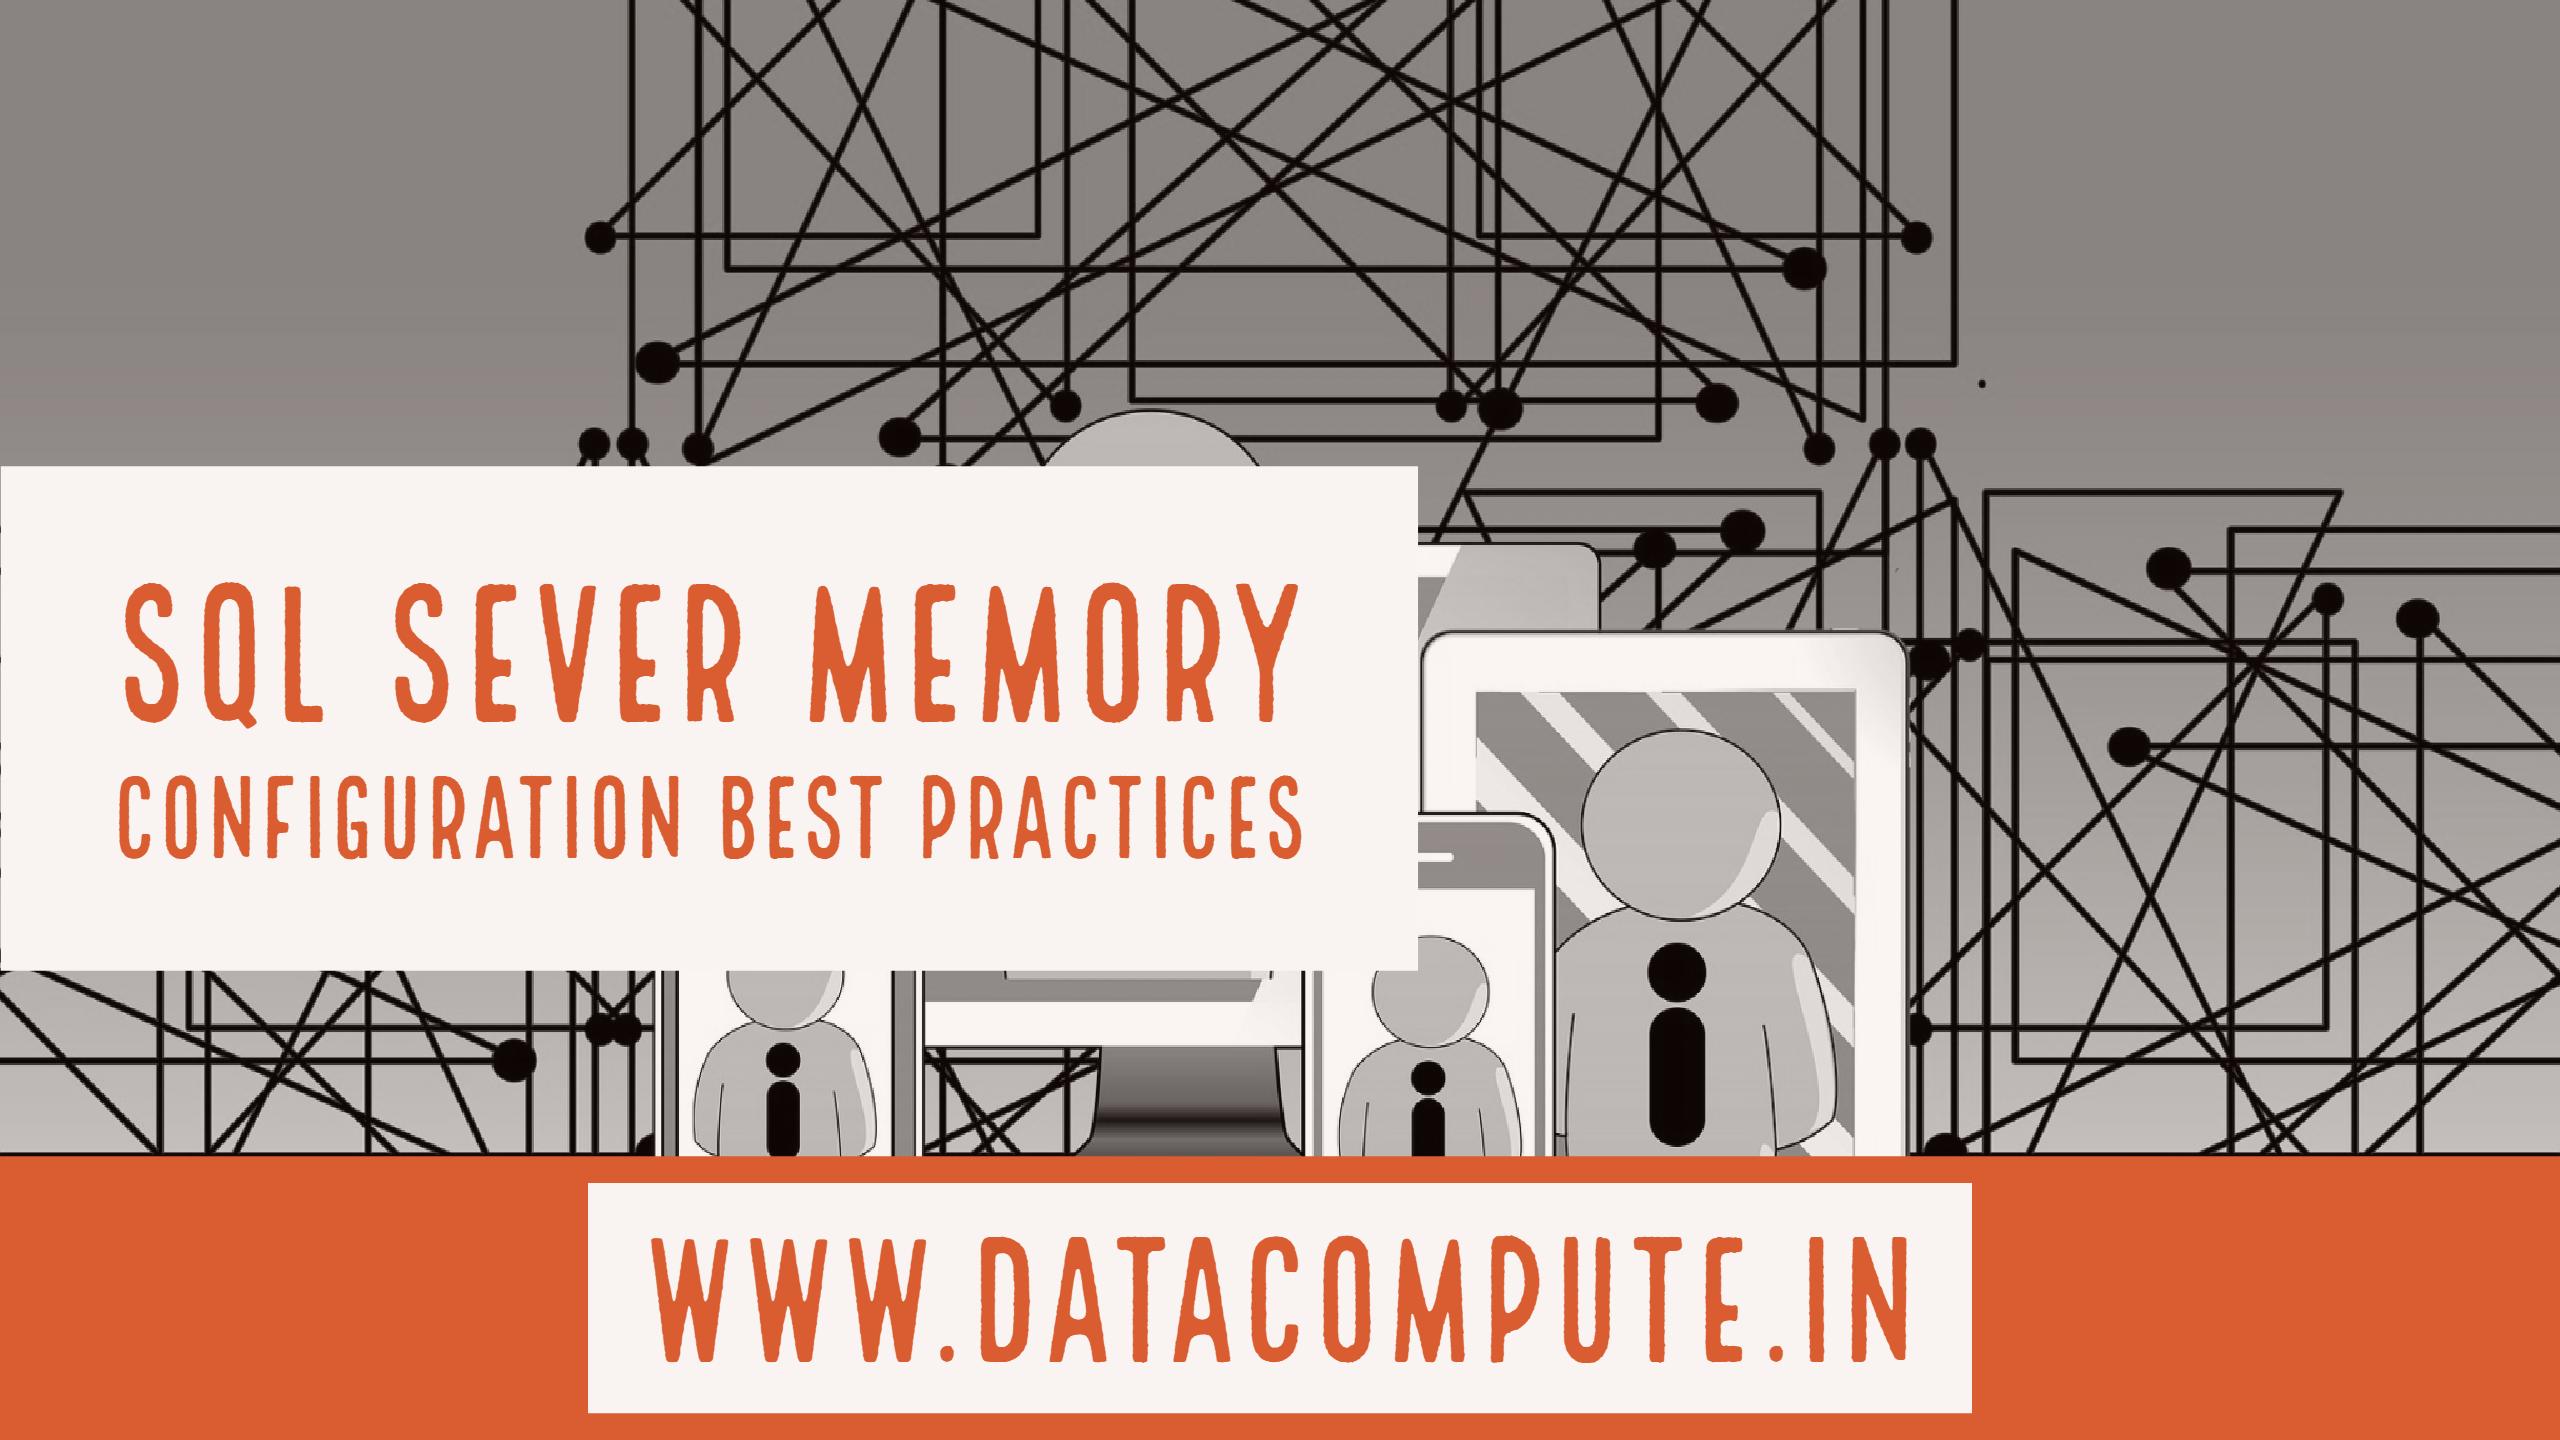 Configure SQL Server Memory Options for Best Practices